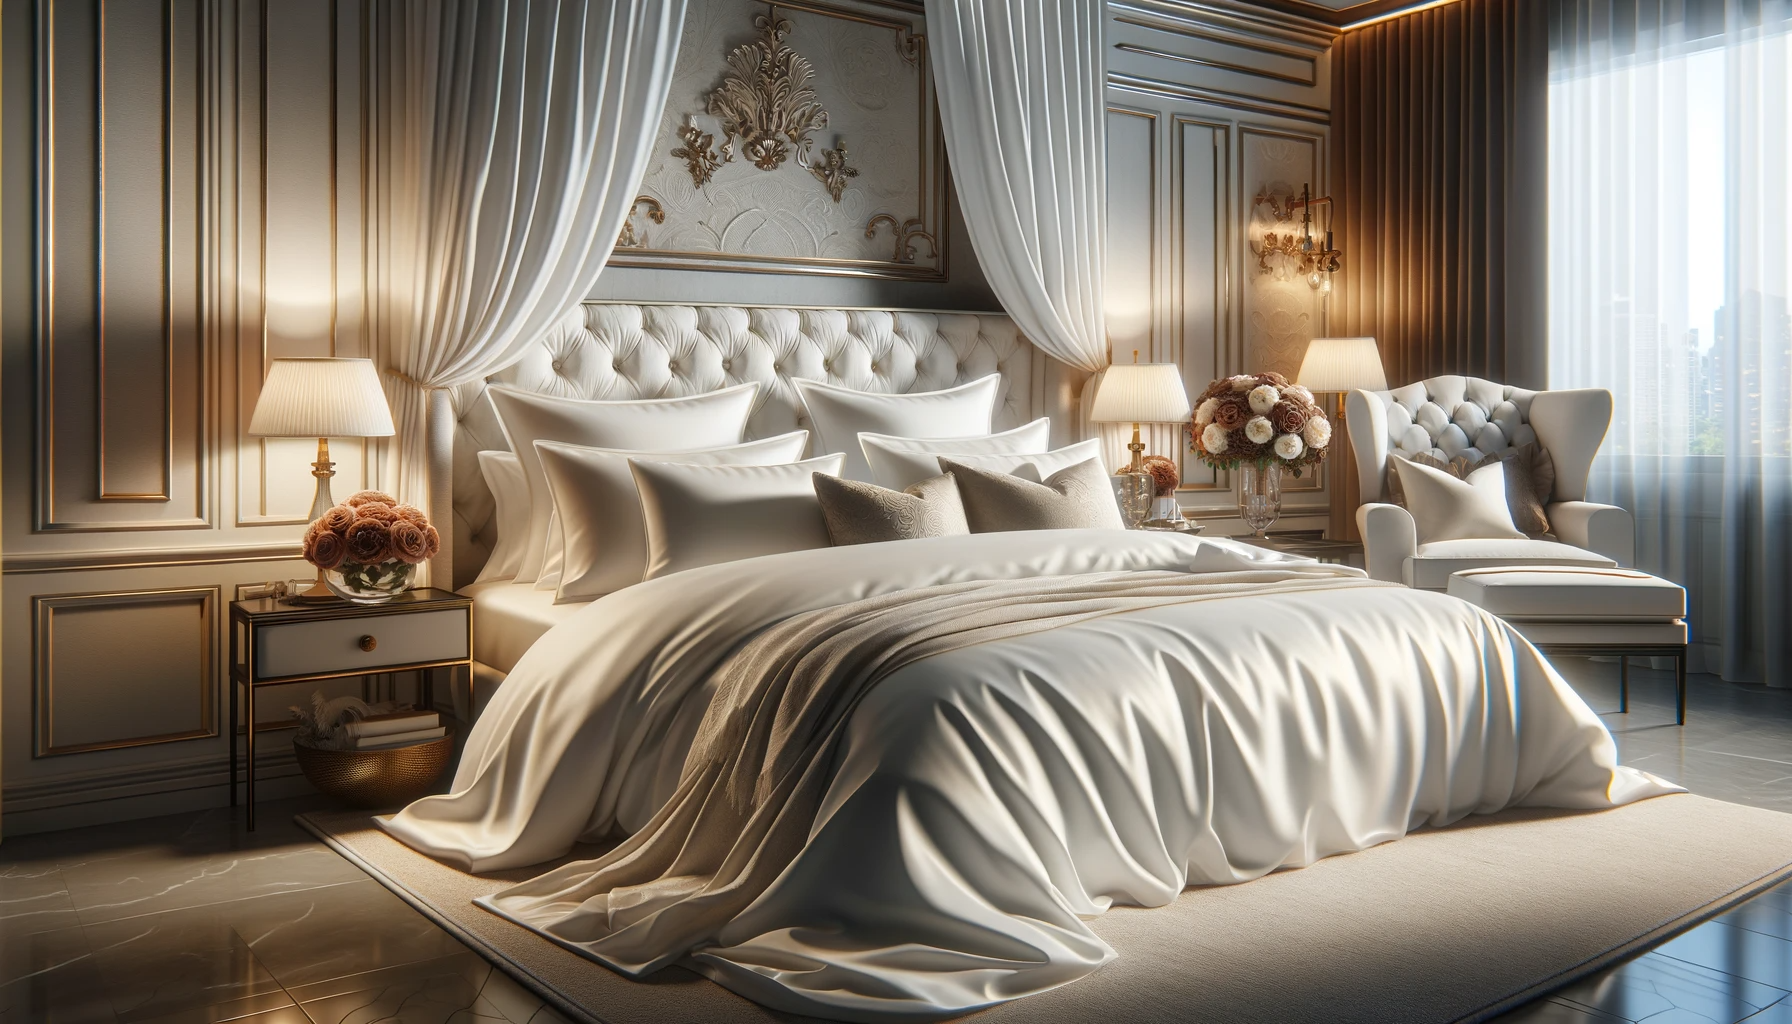 White Egyptian cotton bedding on a luxurious bed, showcasing its superior quality and comfort, with elegant room decor in the background